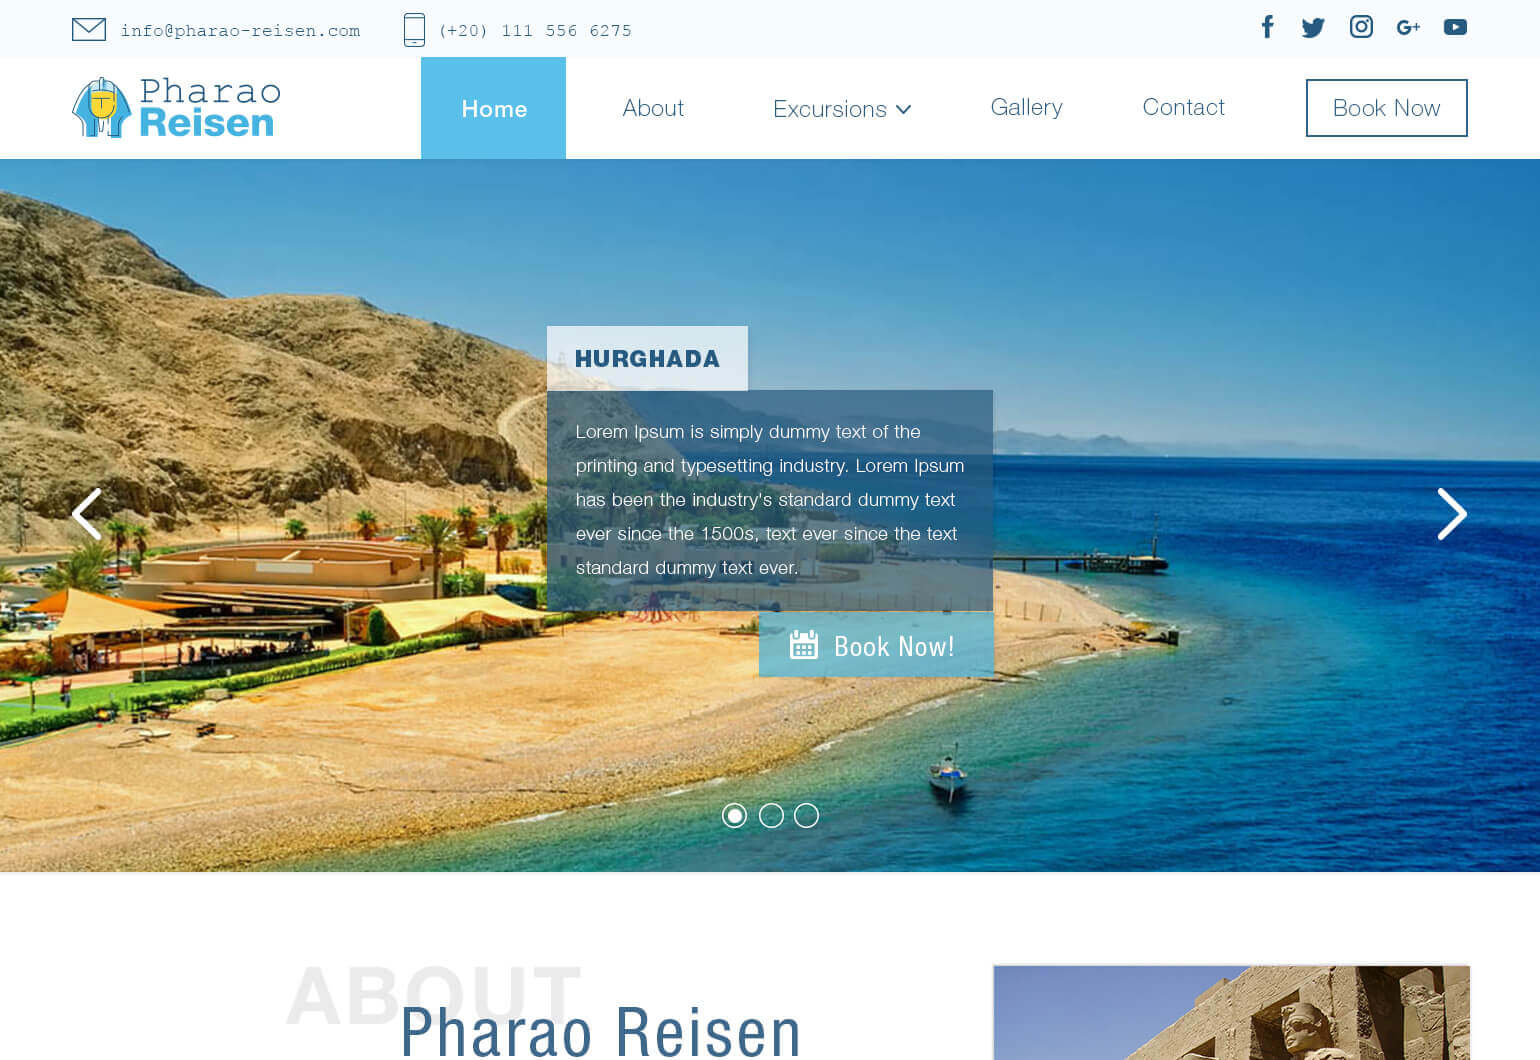 Pharao Reisen for Tourism and Excursions